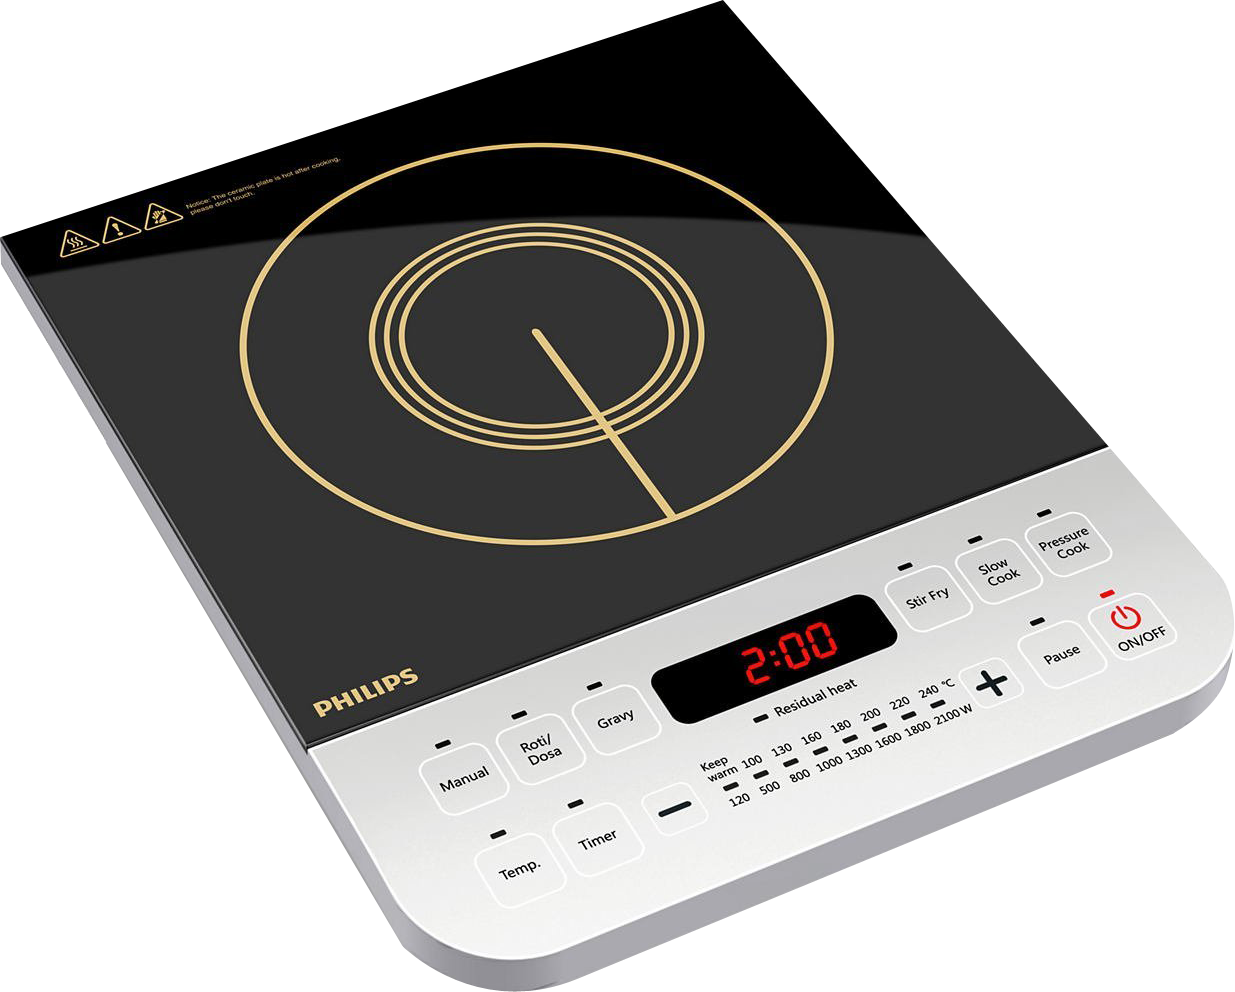 philips induction cooktop